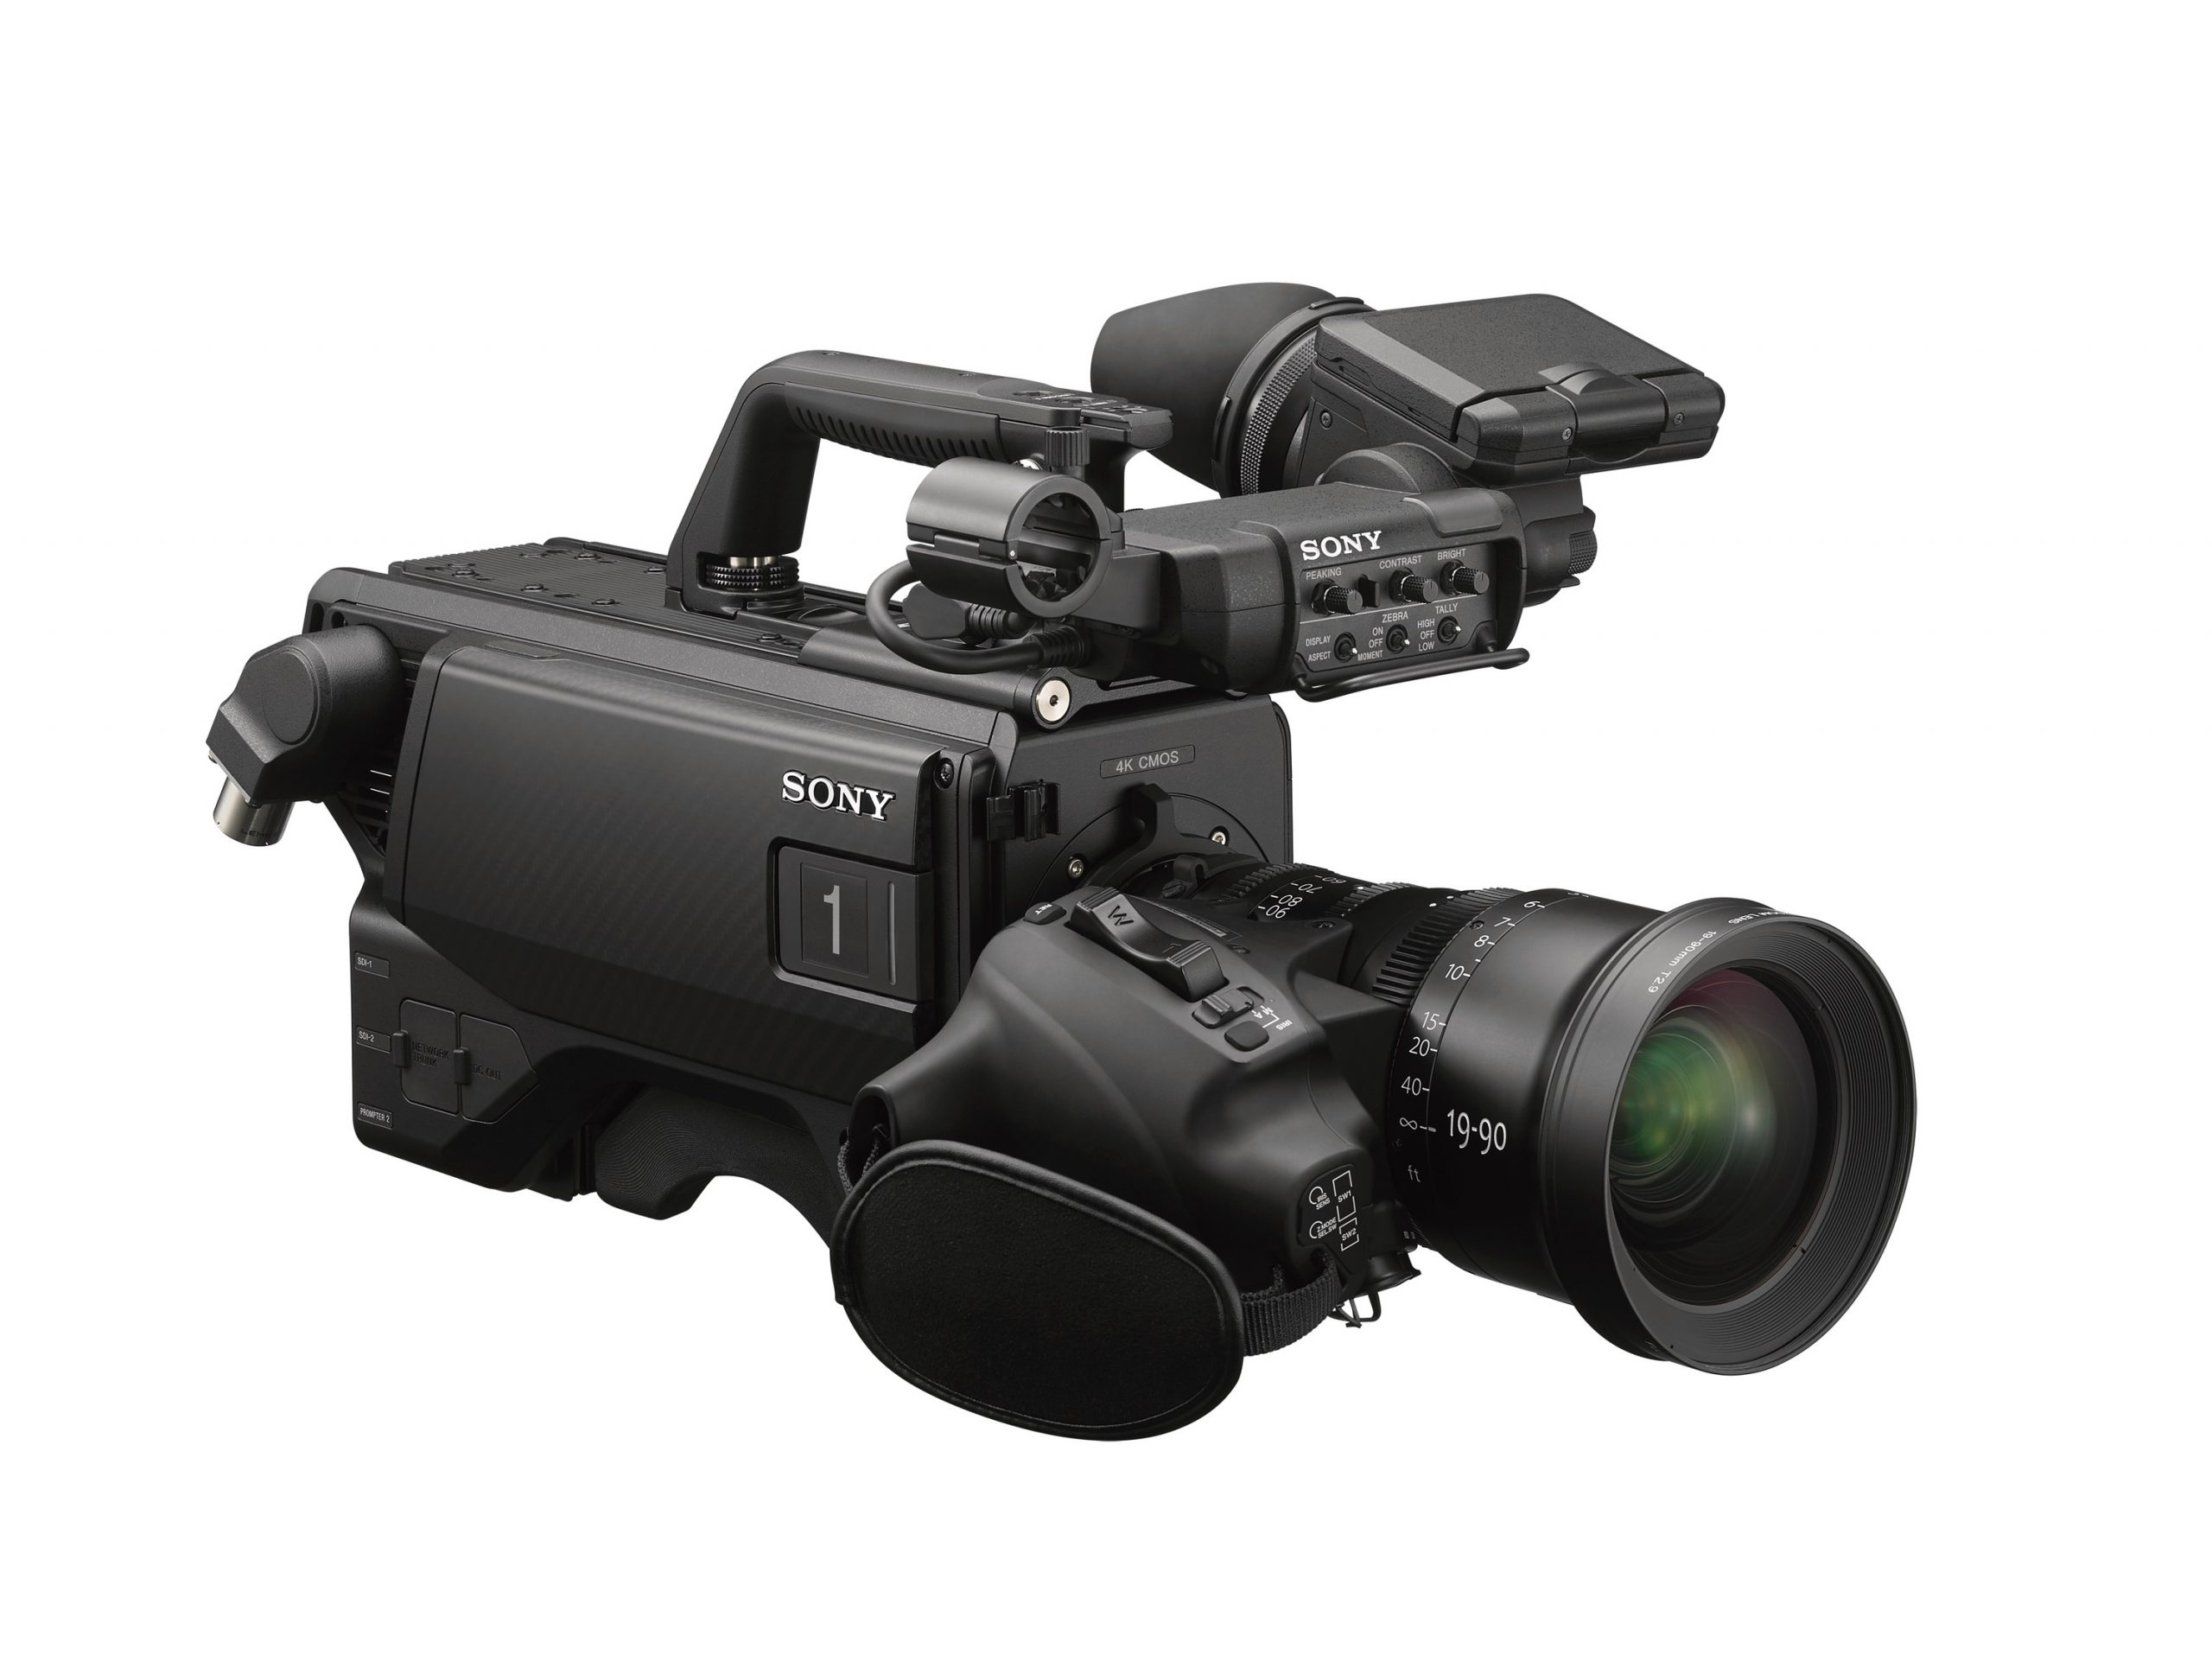 NFL Playoffs 2022: CBS Sports Rolls Out New Sony F5500  Shallow–Depth-of-Field Camera, TrolleyCam, Live Drone for AFC Championship